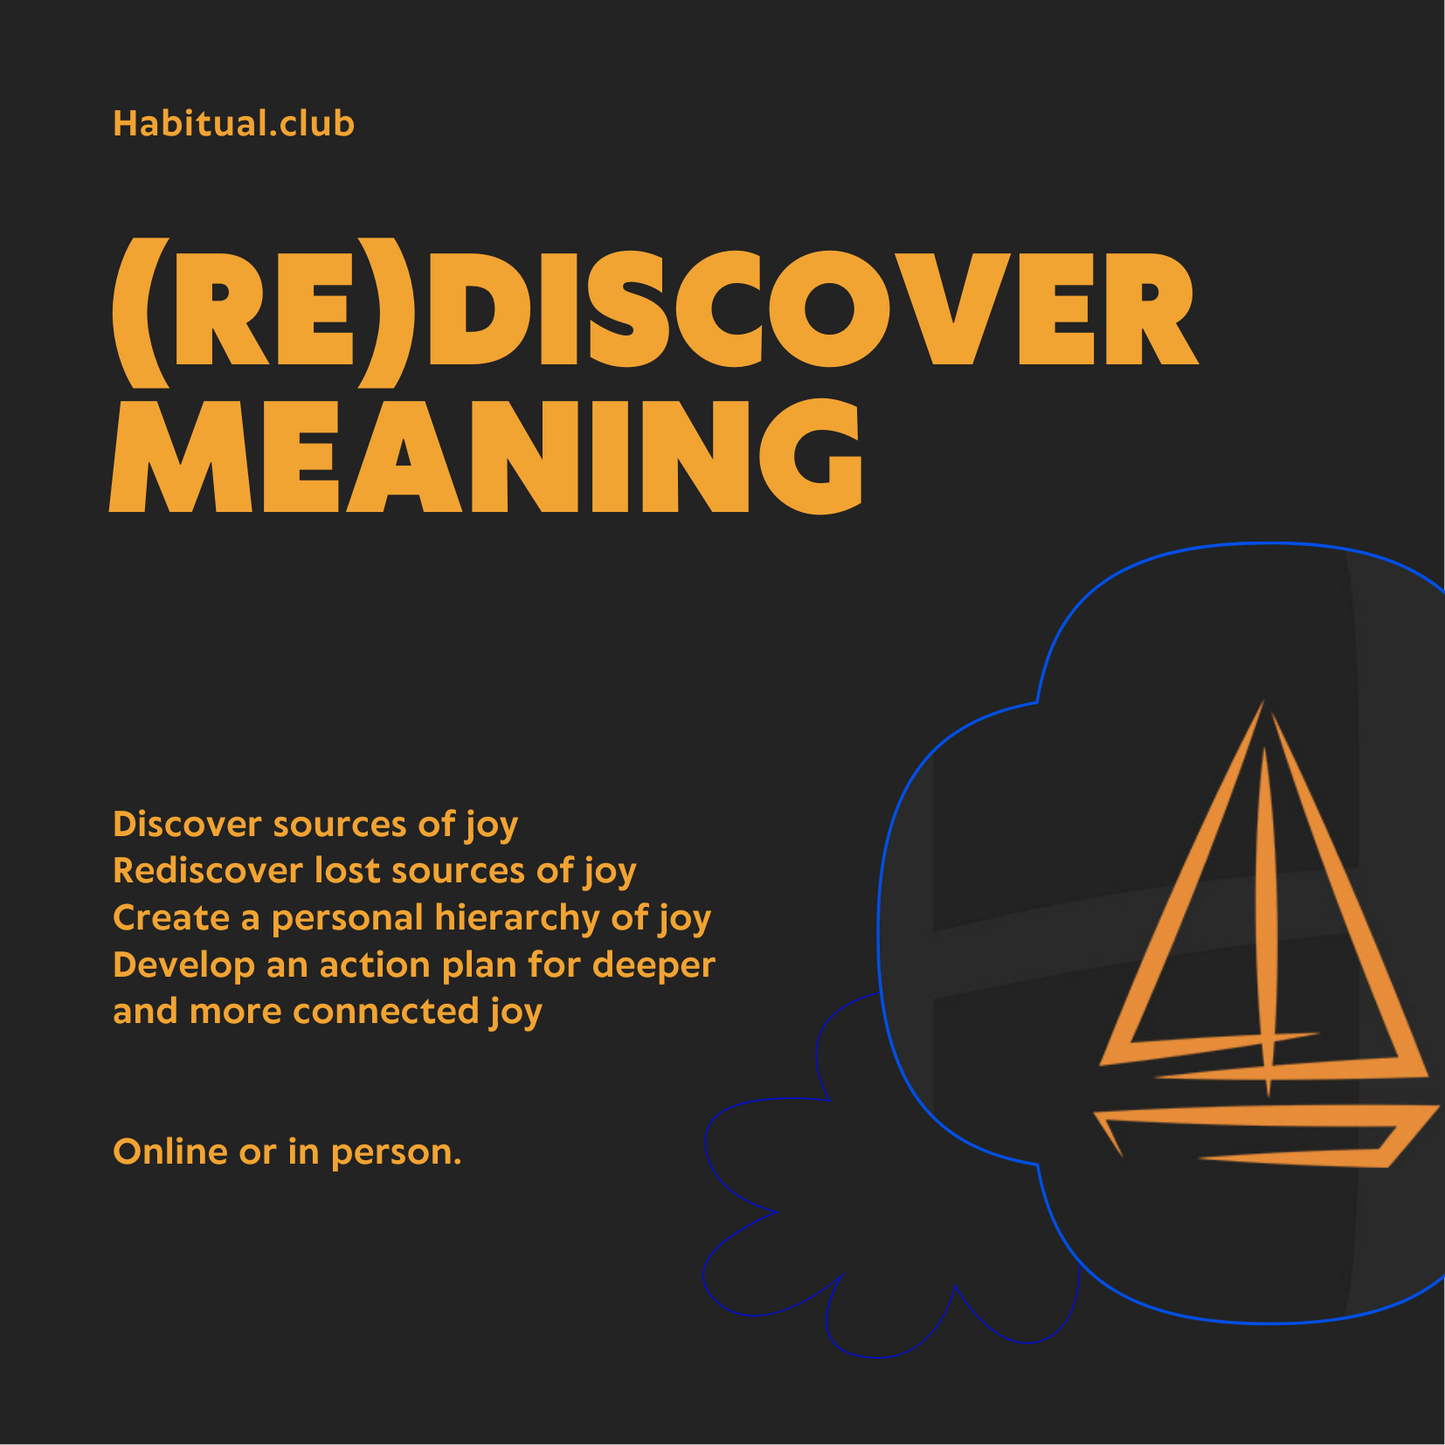 (Re)Discover Meaning